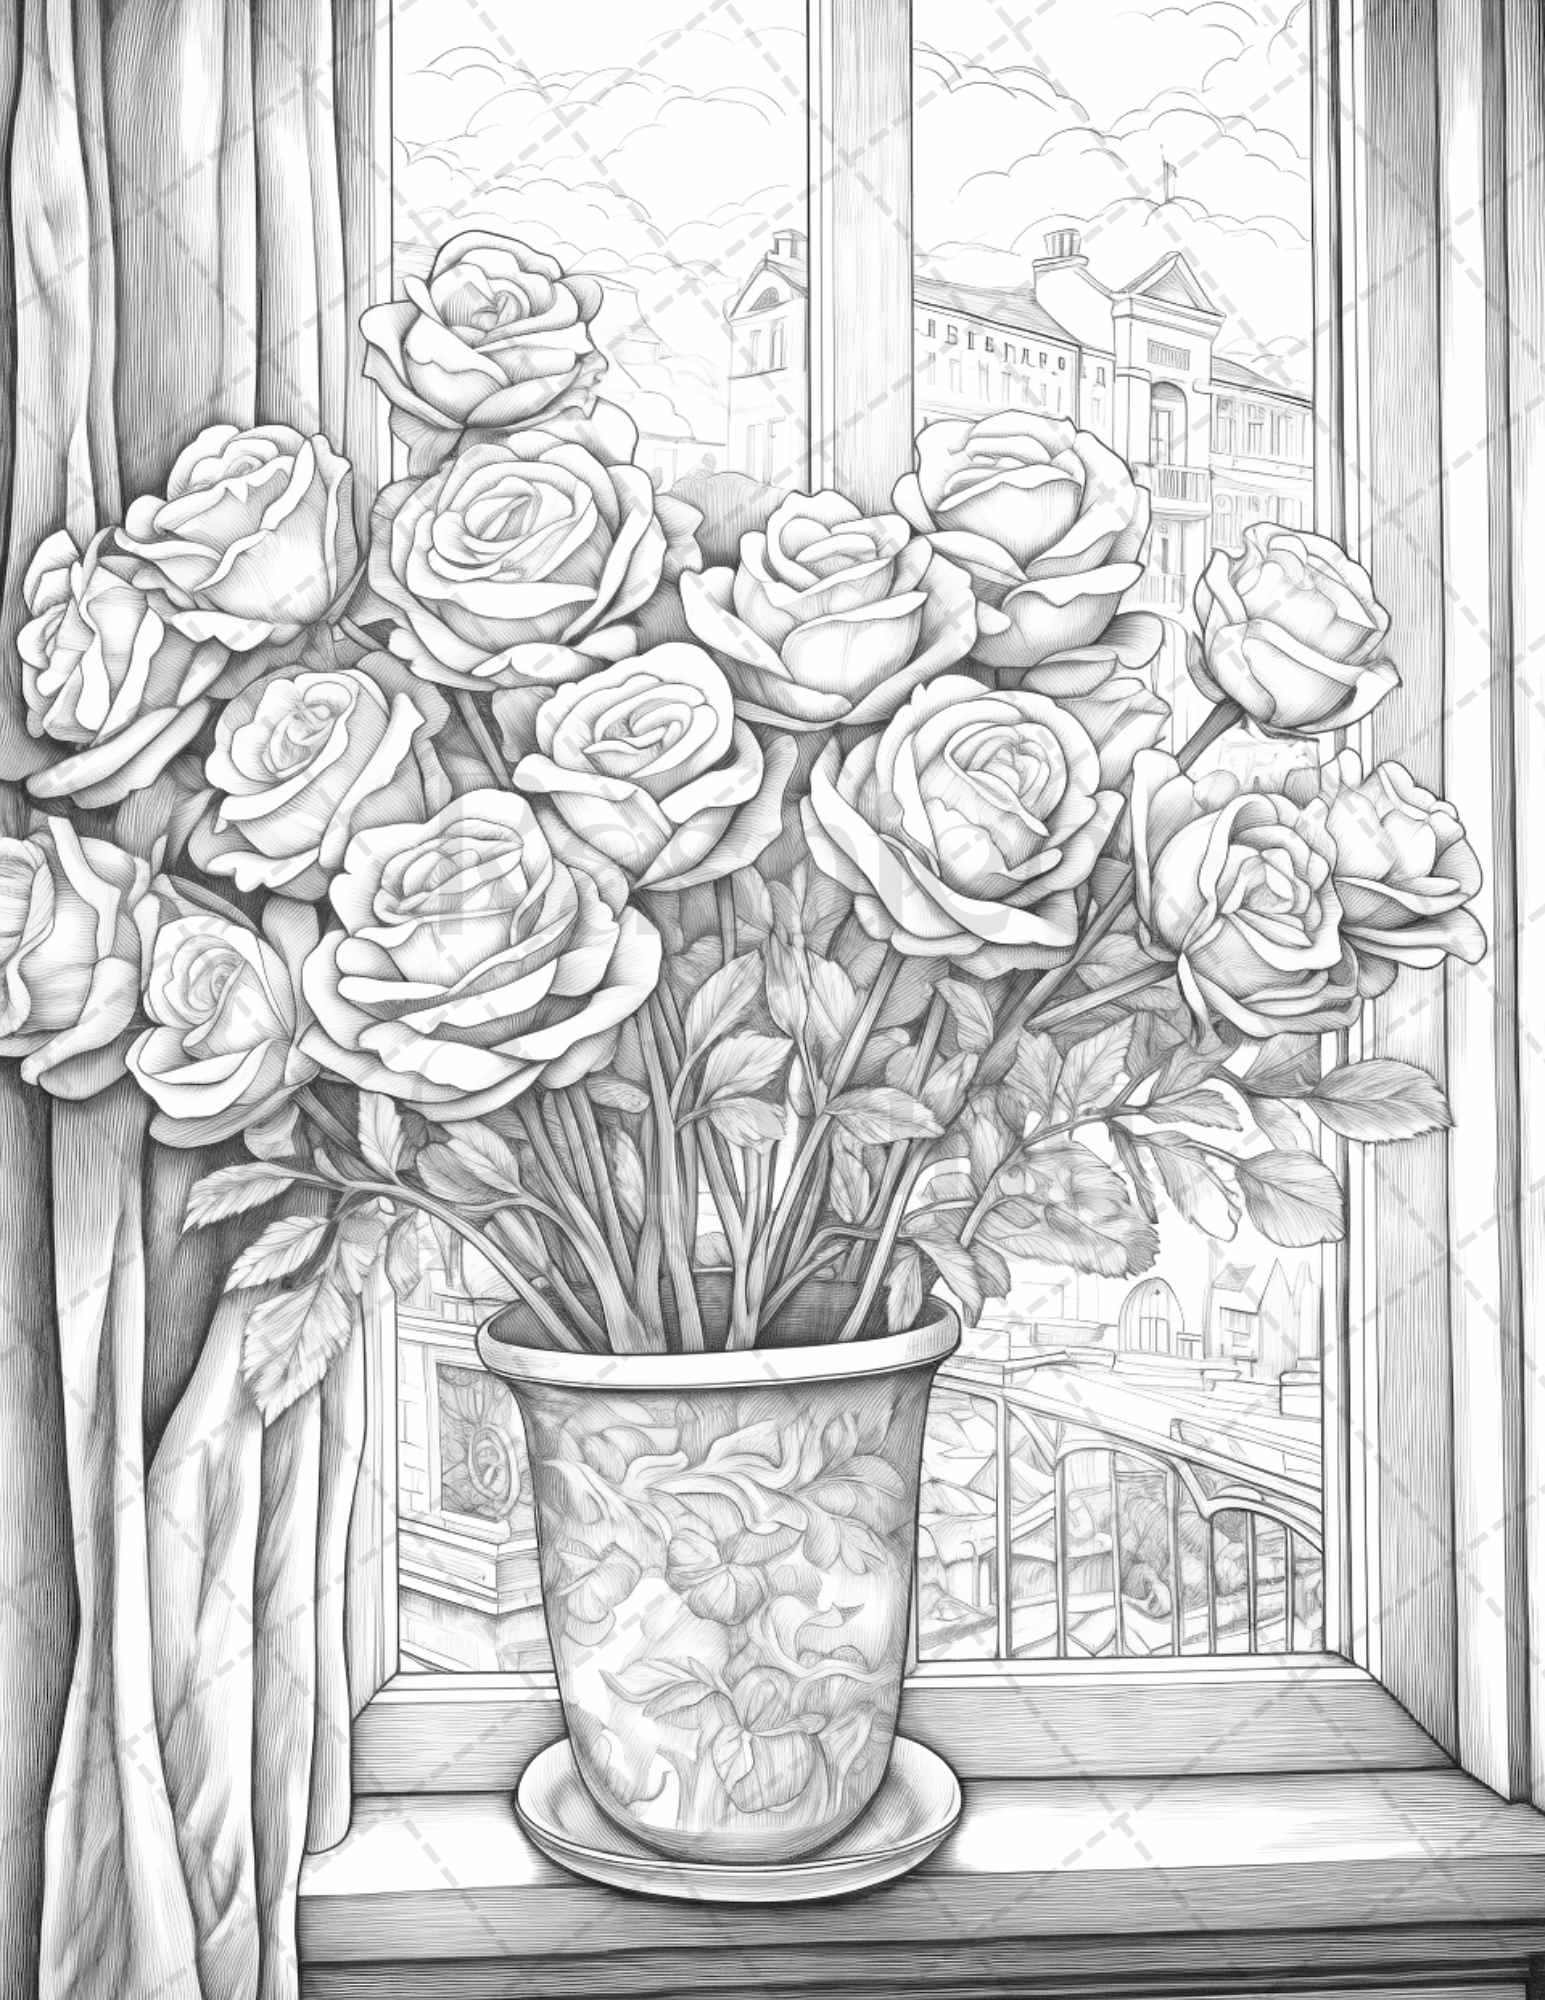 Captivating roses grayscale coloring pages printable for adults pd â coloring